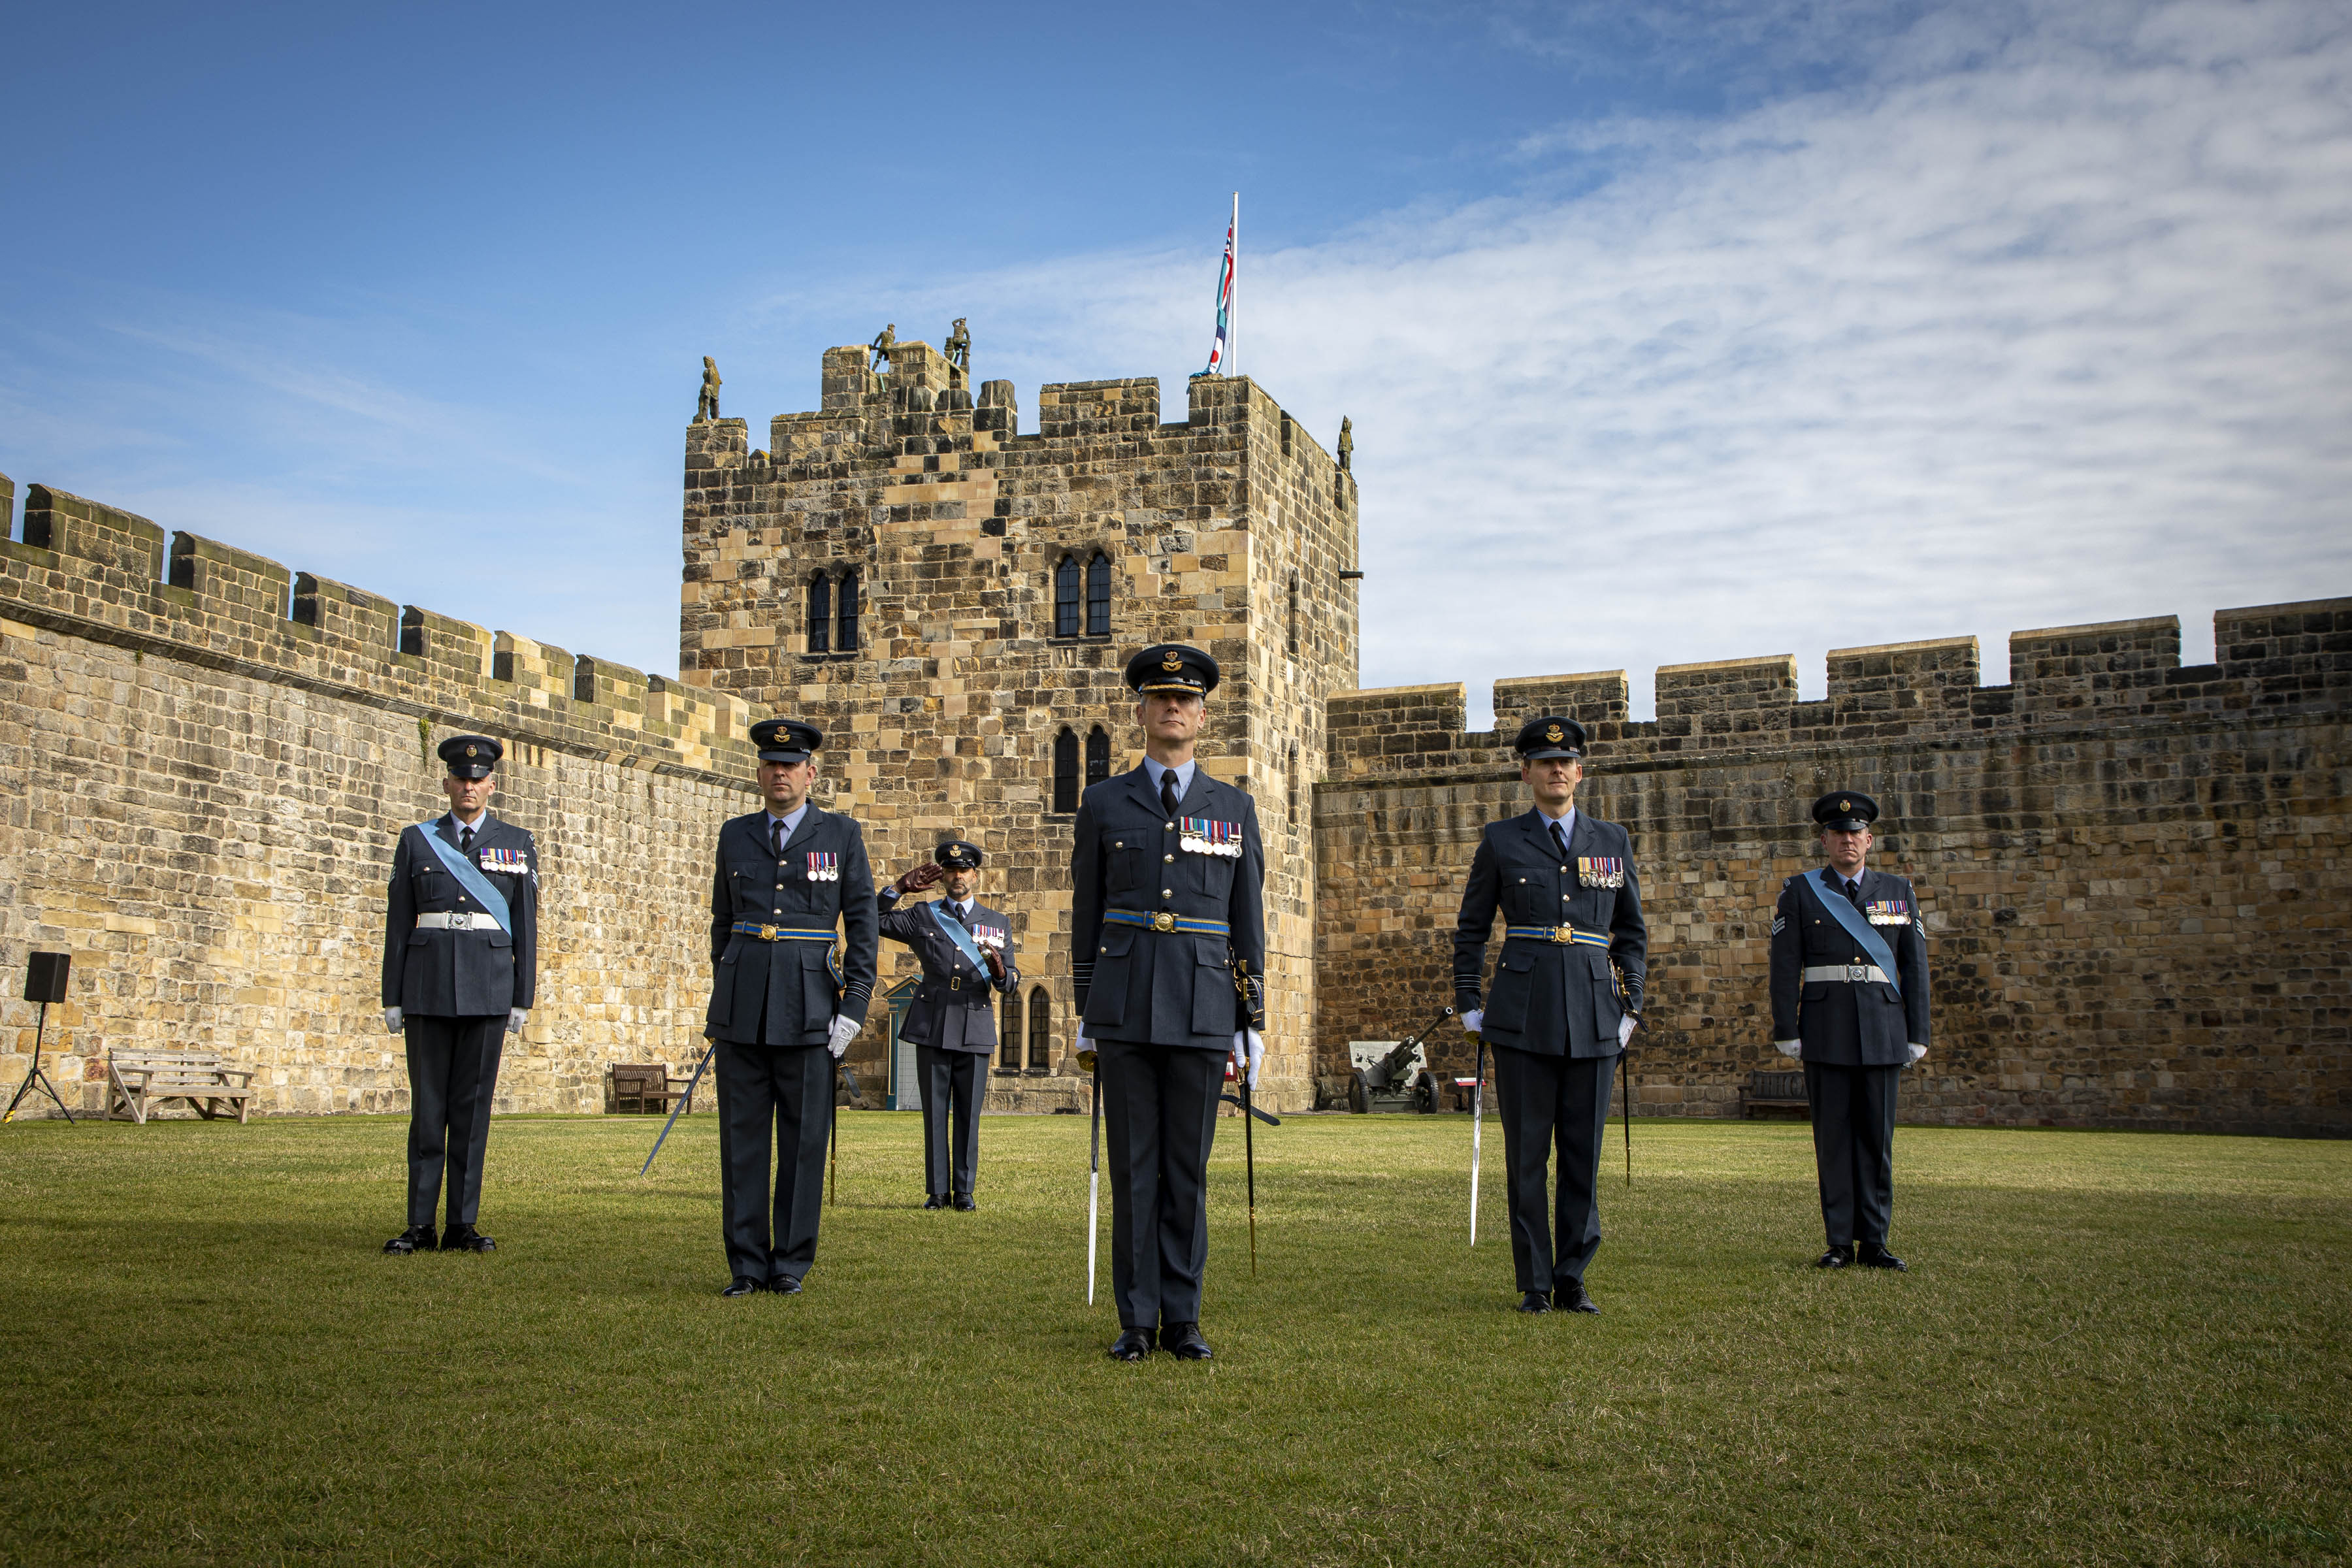 Reformation parade for 19 Squadron and 20 Squadron at Alnwick Castle